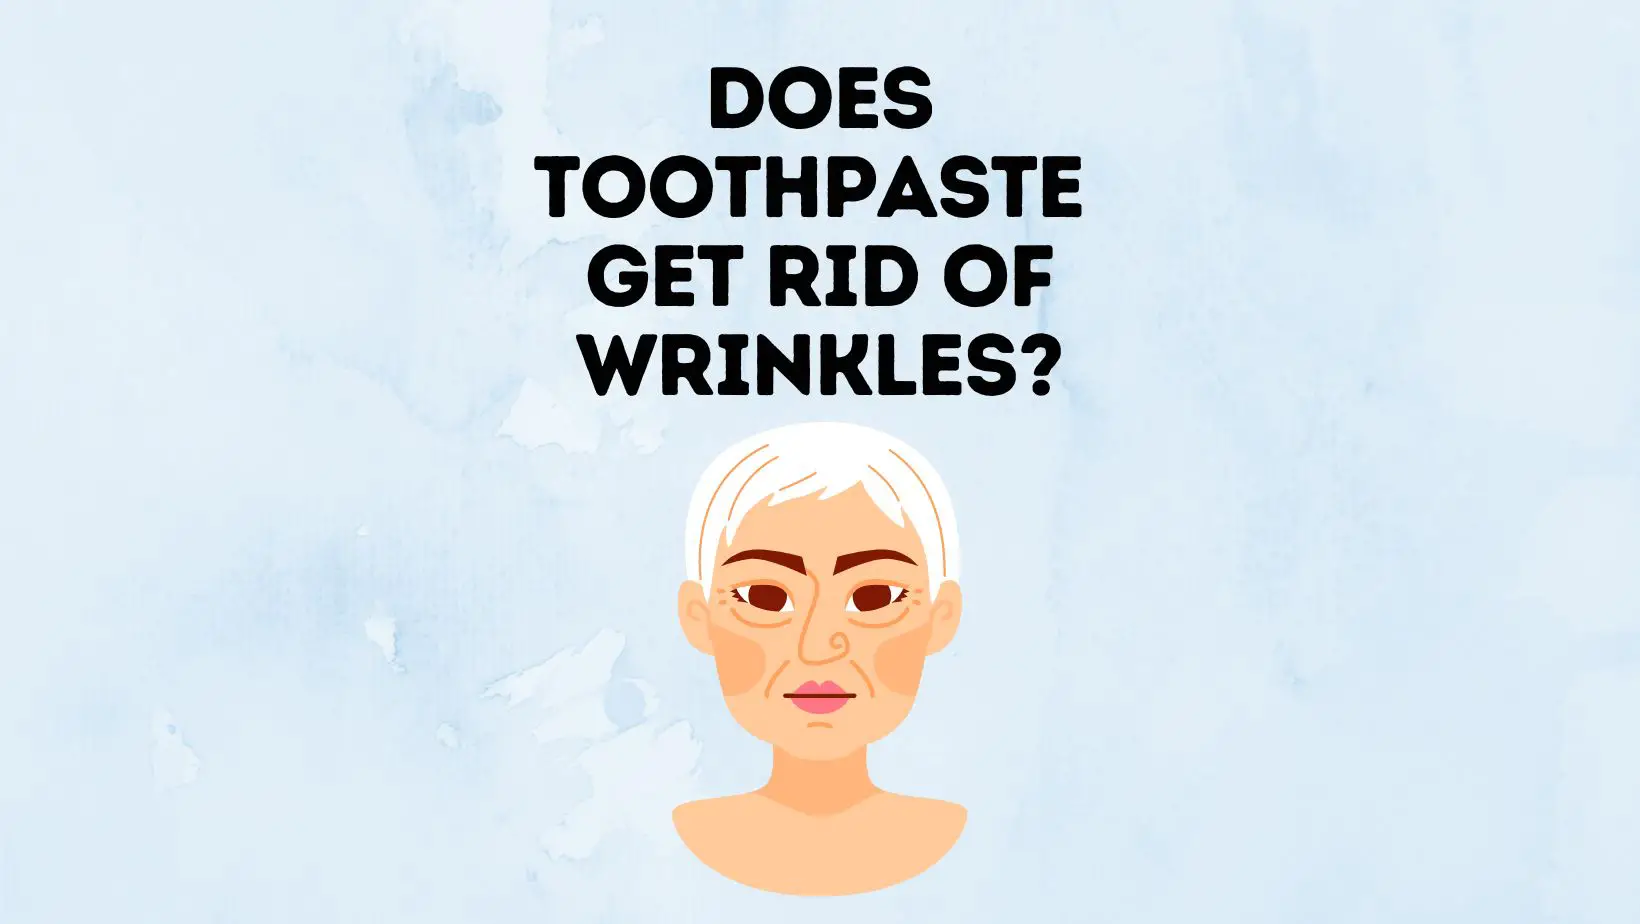 Does ToothPaste Get Rid Of Wrinkles